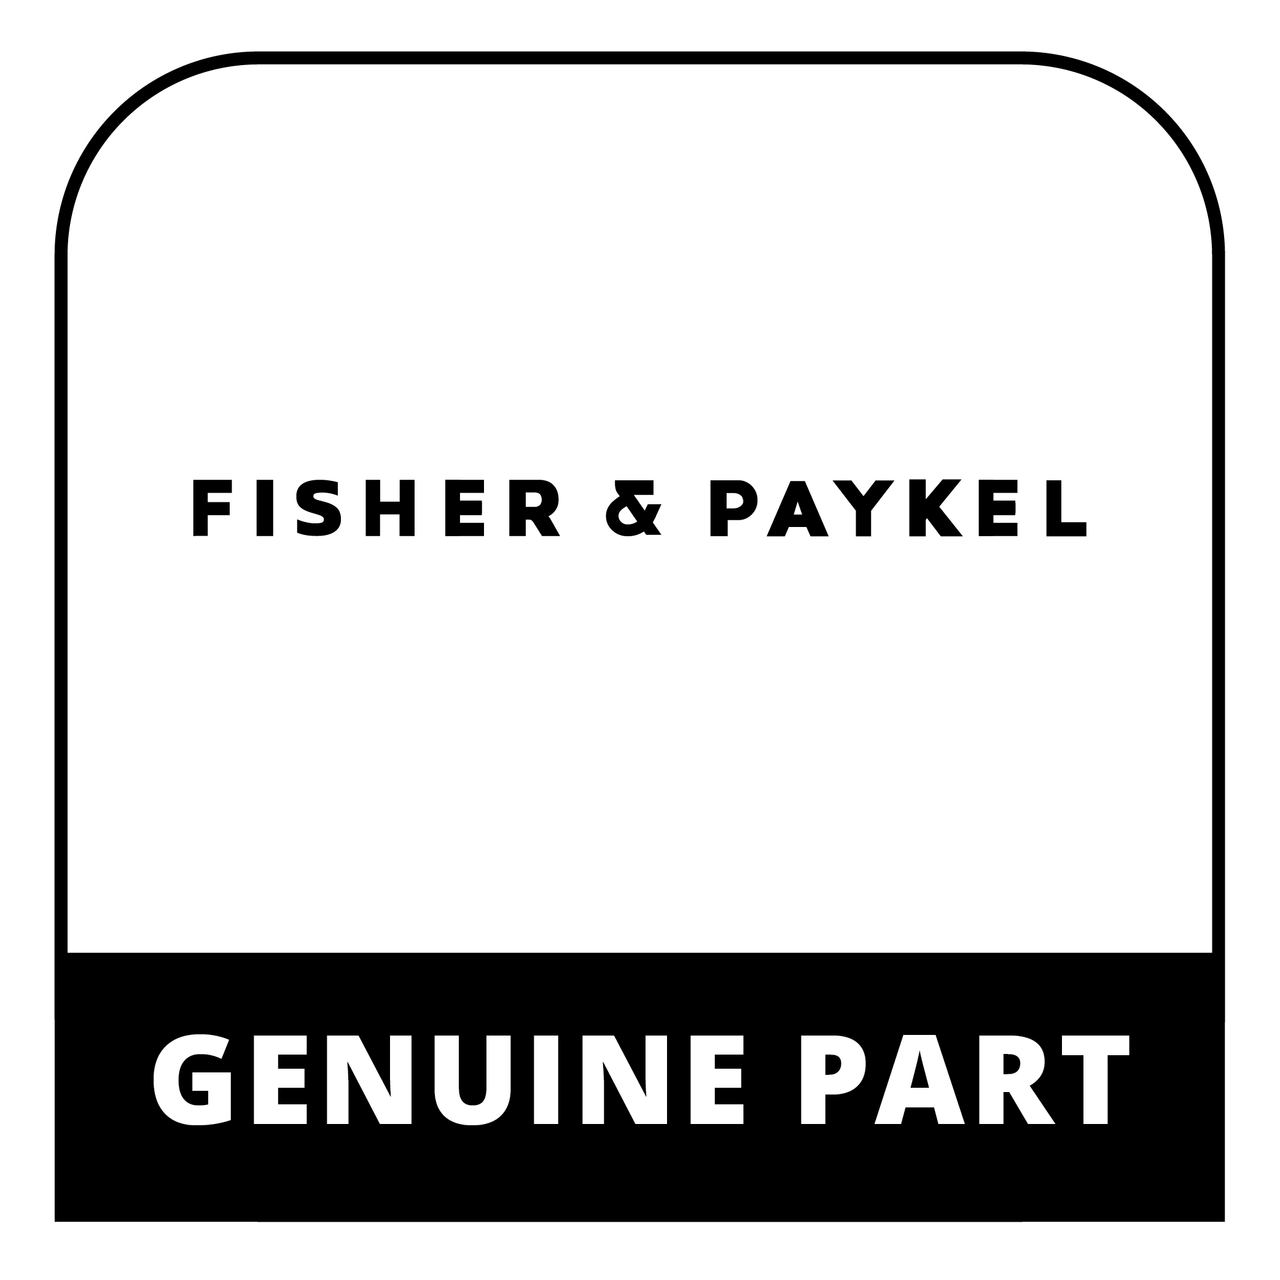 Fisher & Paykel 590924 - Bookset Bgc30 Grills Dcs Usca - Discontinued 9/19 MT - Genuine Fisher & Paykel (DCS) Part